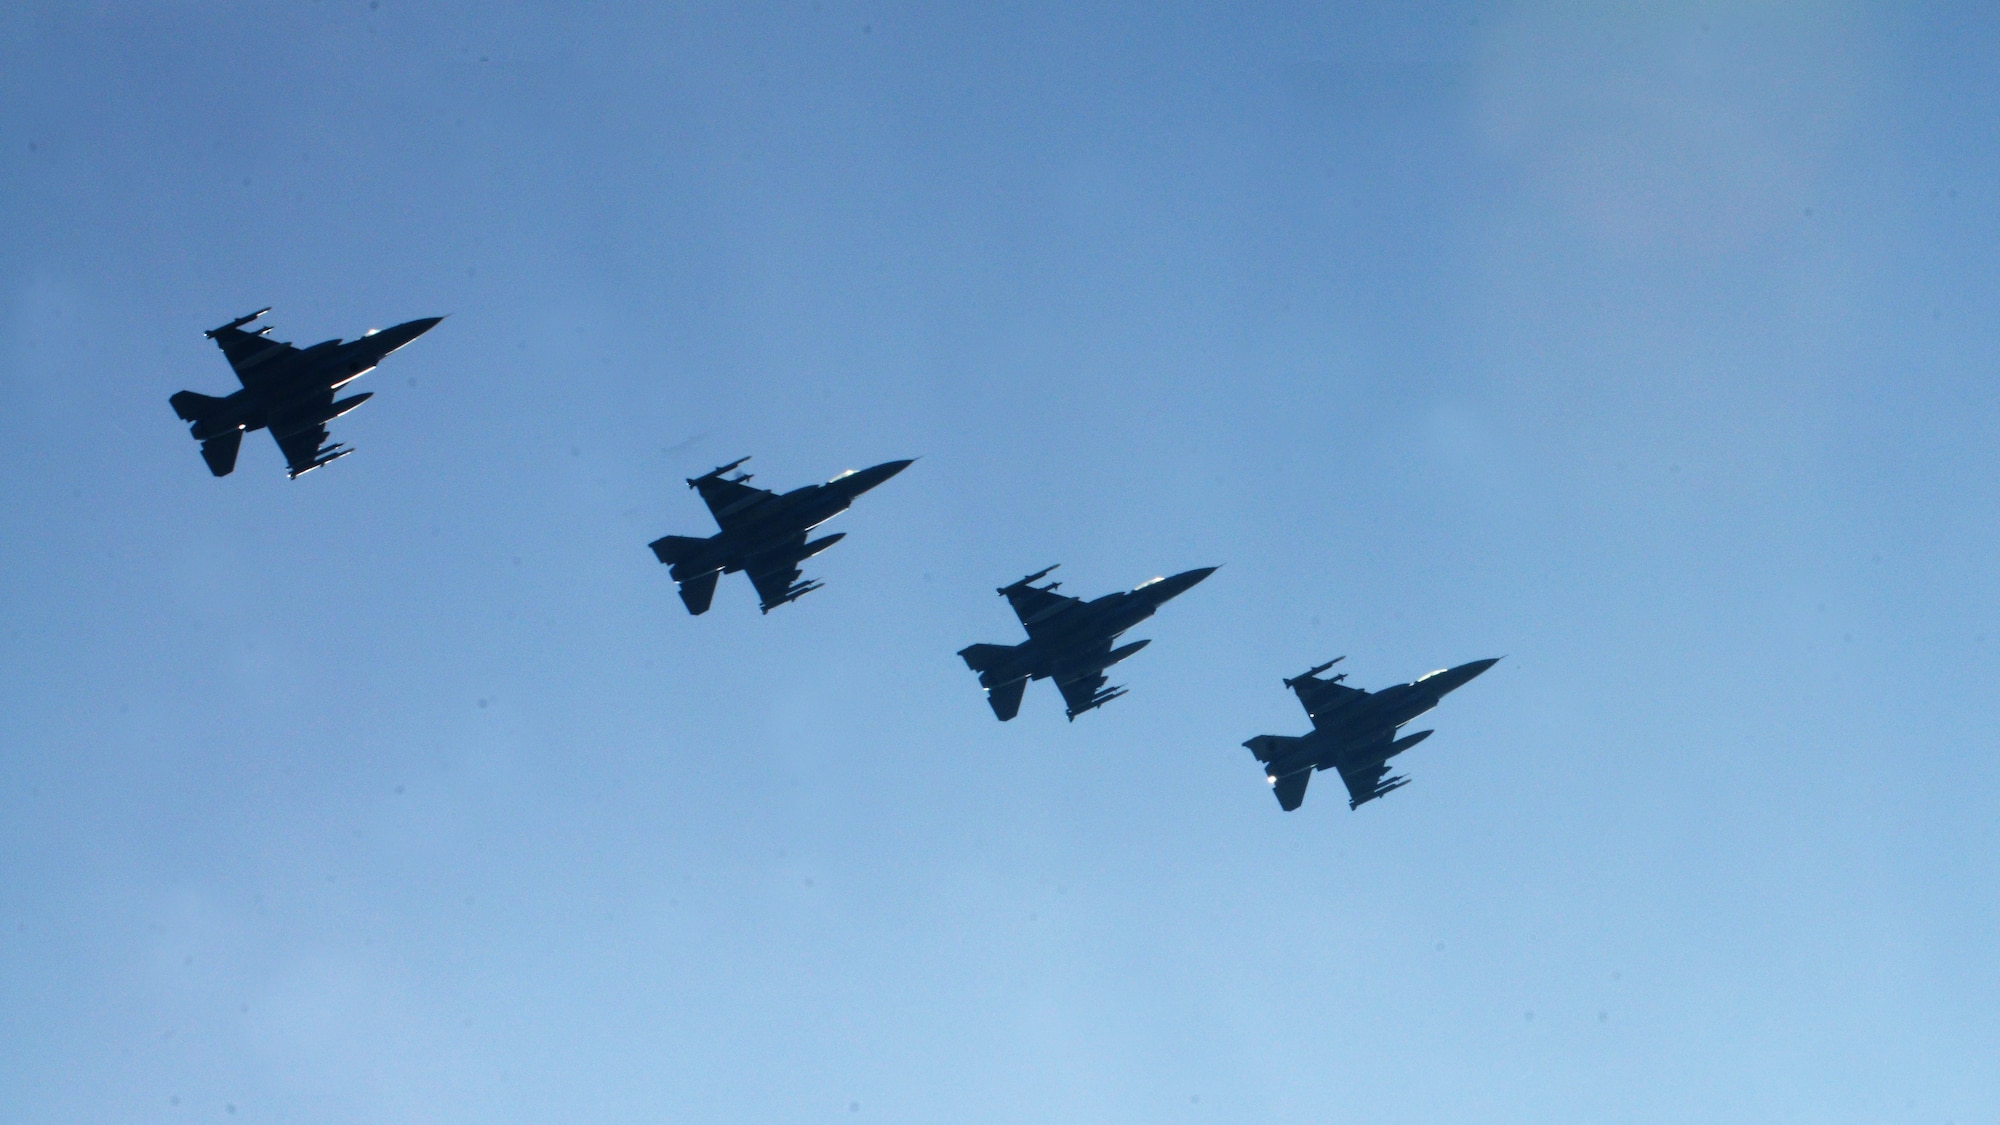 Four F-16 Fighting Falcons assigned to the 555th Fighter Squadron from Aviano Air Base, Italy, fly in formation prior to landing March 14, 2014, at Lask Air Base, Poland. A total of twelve 555th Fighter Squadron F-16s and about 240 service members arrived to augment an off-site training event, which demonstrates an enduring partnership with NATO allies.  (U.S. Air Force photo/Airman 1st Class Ryan Conroy)